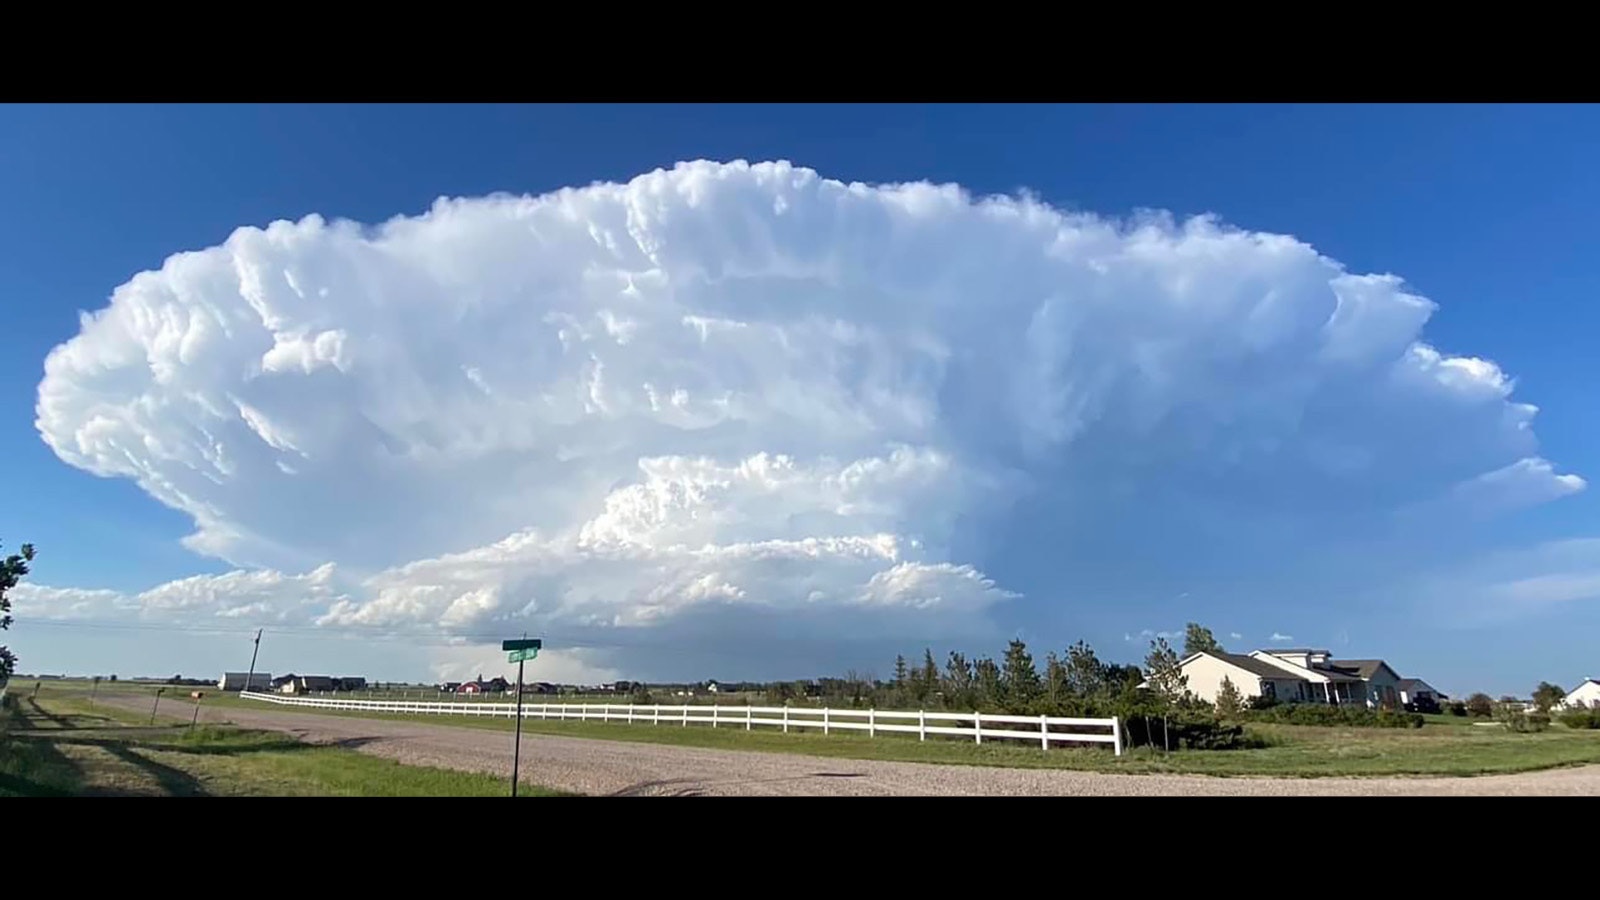 Lori Townsend shared dramatic photos of a giant supercell thunderhead that moved over southeast Wyoming on Monday to the Wyoming Through The Lens Facebook page.